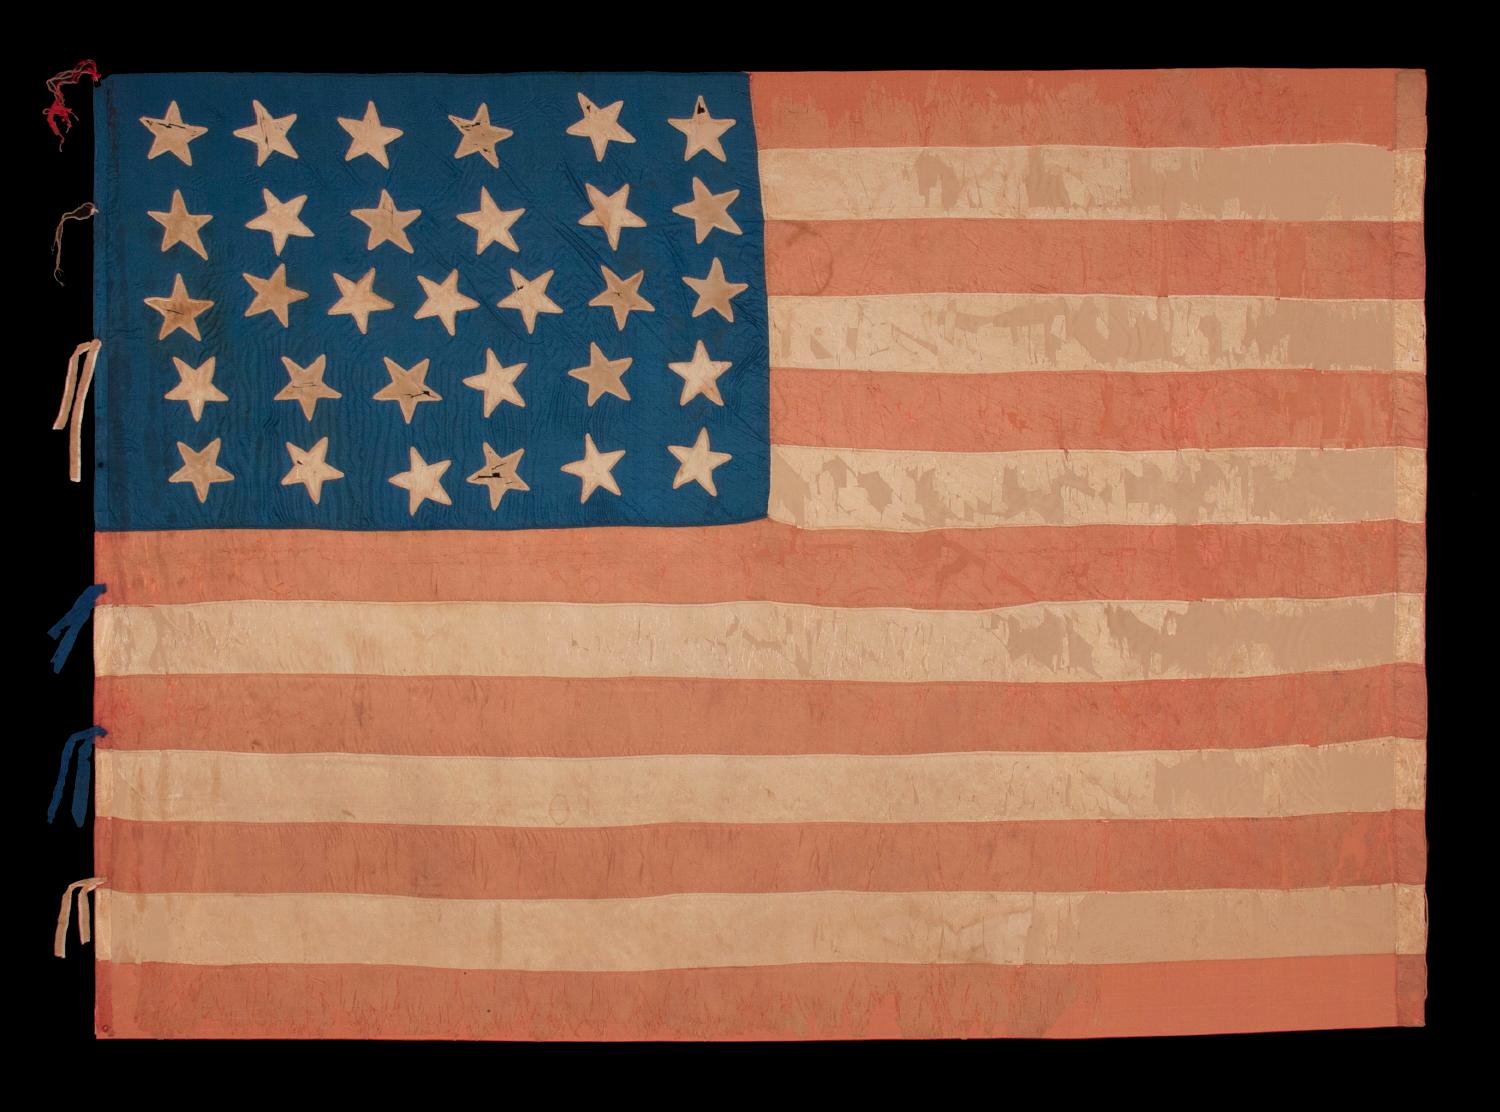 31 STARS IN A 6-6-7-6-6 LINEAL PATTERN, WITH SCATTERED ORIENTATION, ANTIQUE AMERICAN FLAG, MADE OF SILK AND WITH THE BLUE CANTON RESTING ON THE WAR STRIPE, CALIFORNIA STATEHOOD, 1850-1858, LIKELY HAND-CARRIED INTO THE CIVIL WAR BY A MILITIA UNIT